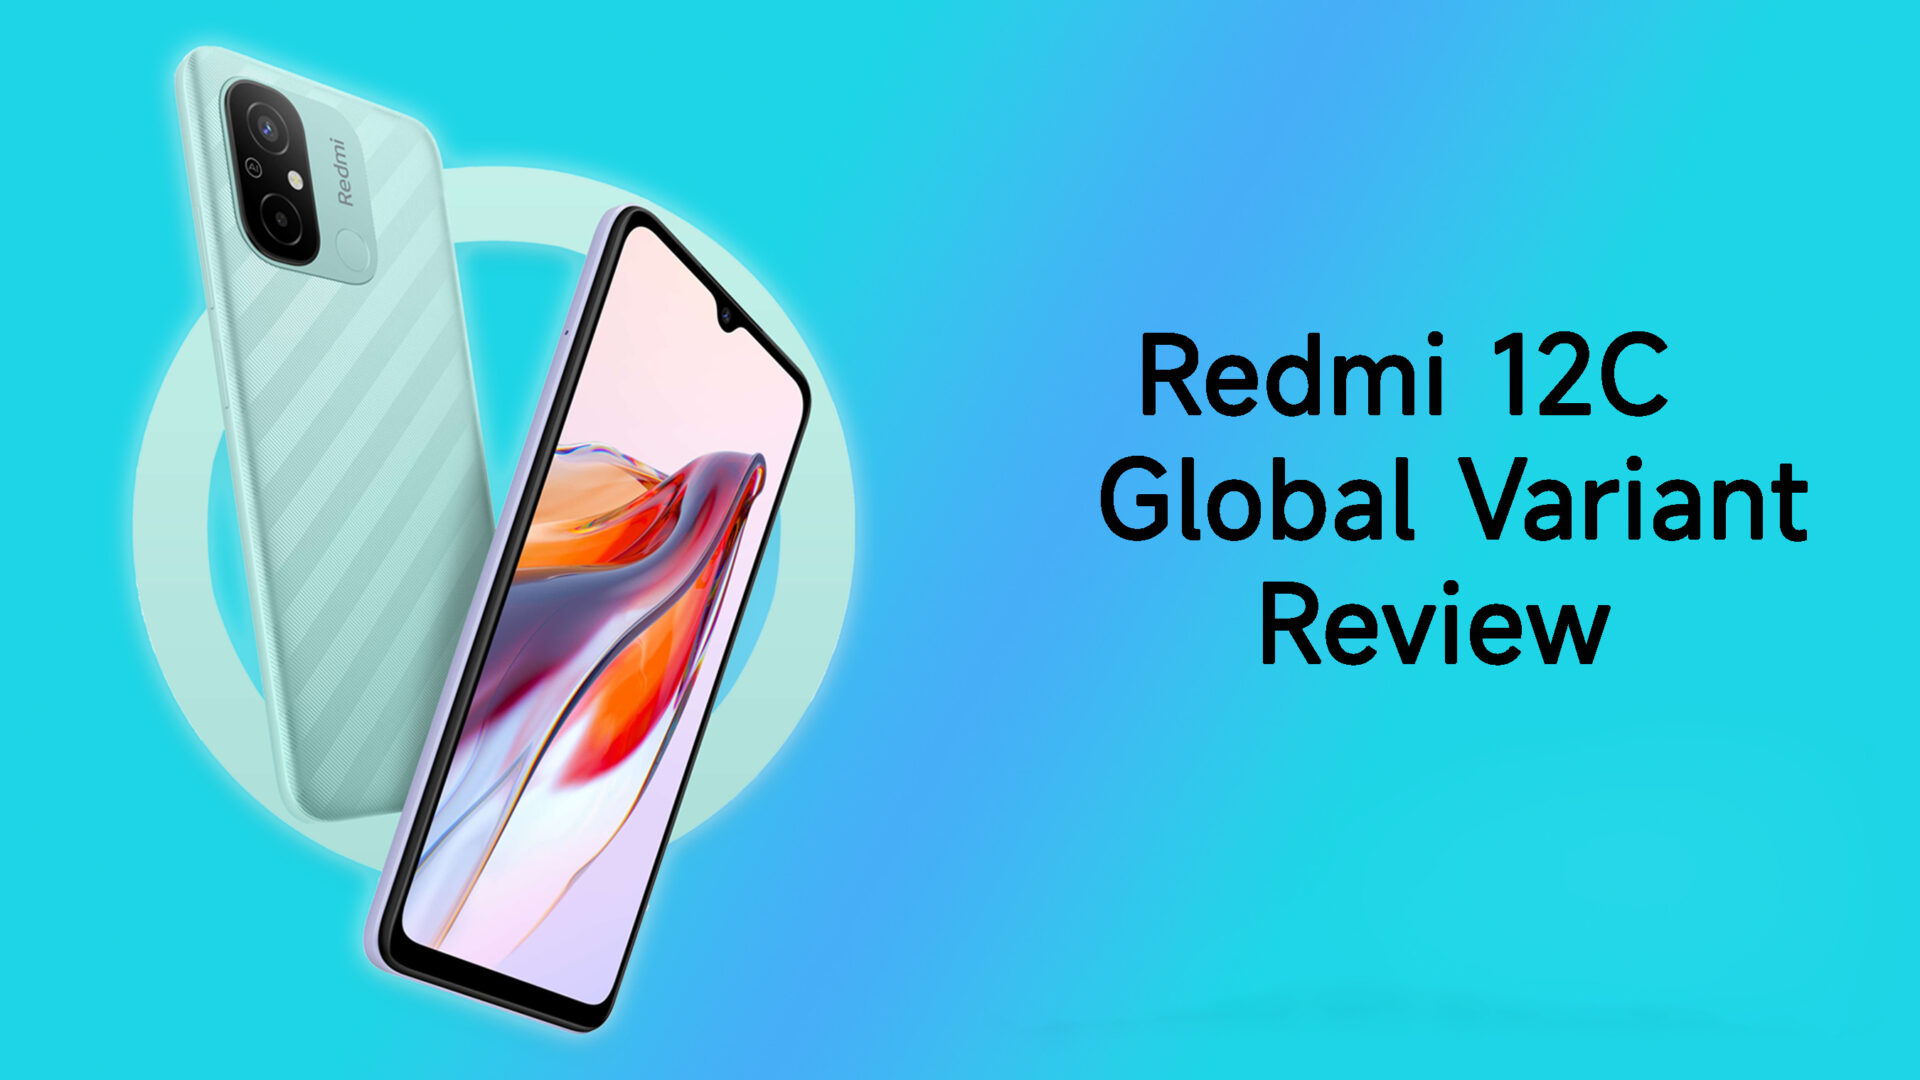 Redmi 12C Global Variant Review Revealed! - xiaomiui